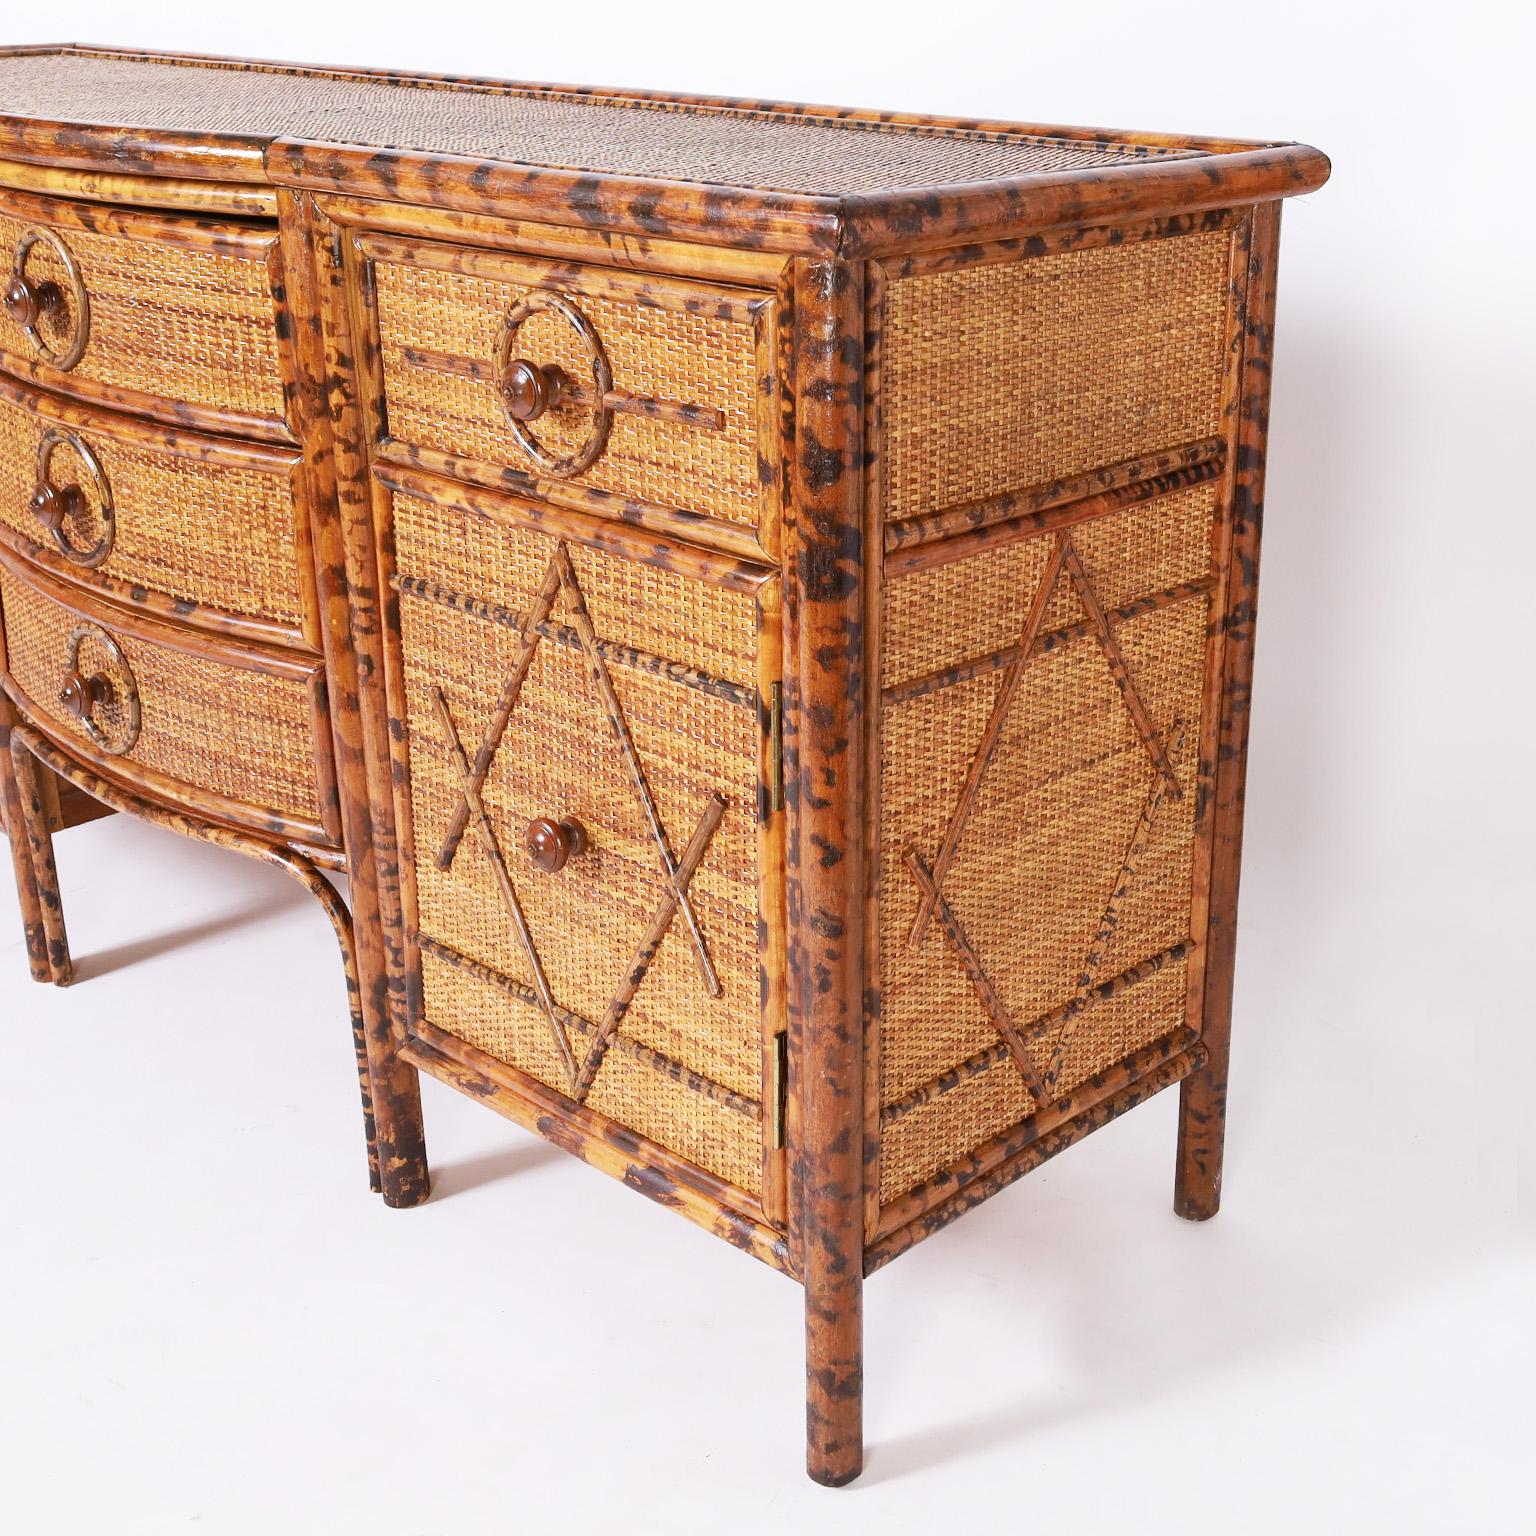 British Colonial Burnt Bamboo and Grasscloth Credenza or Sideboard